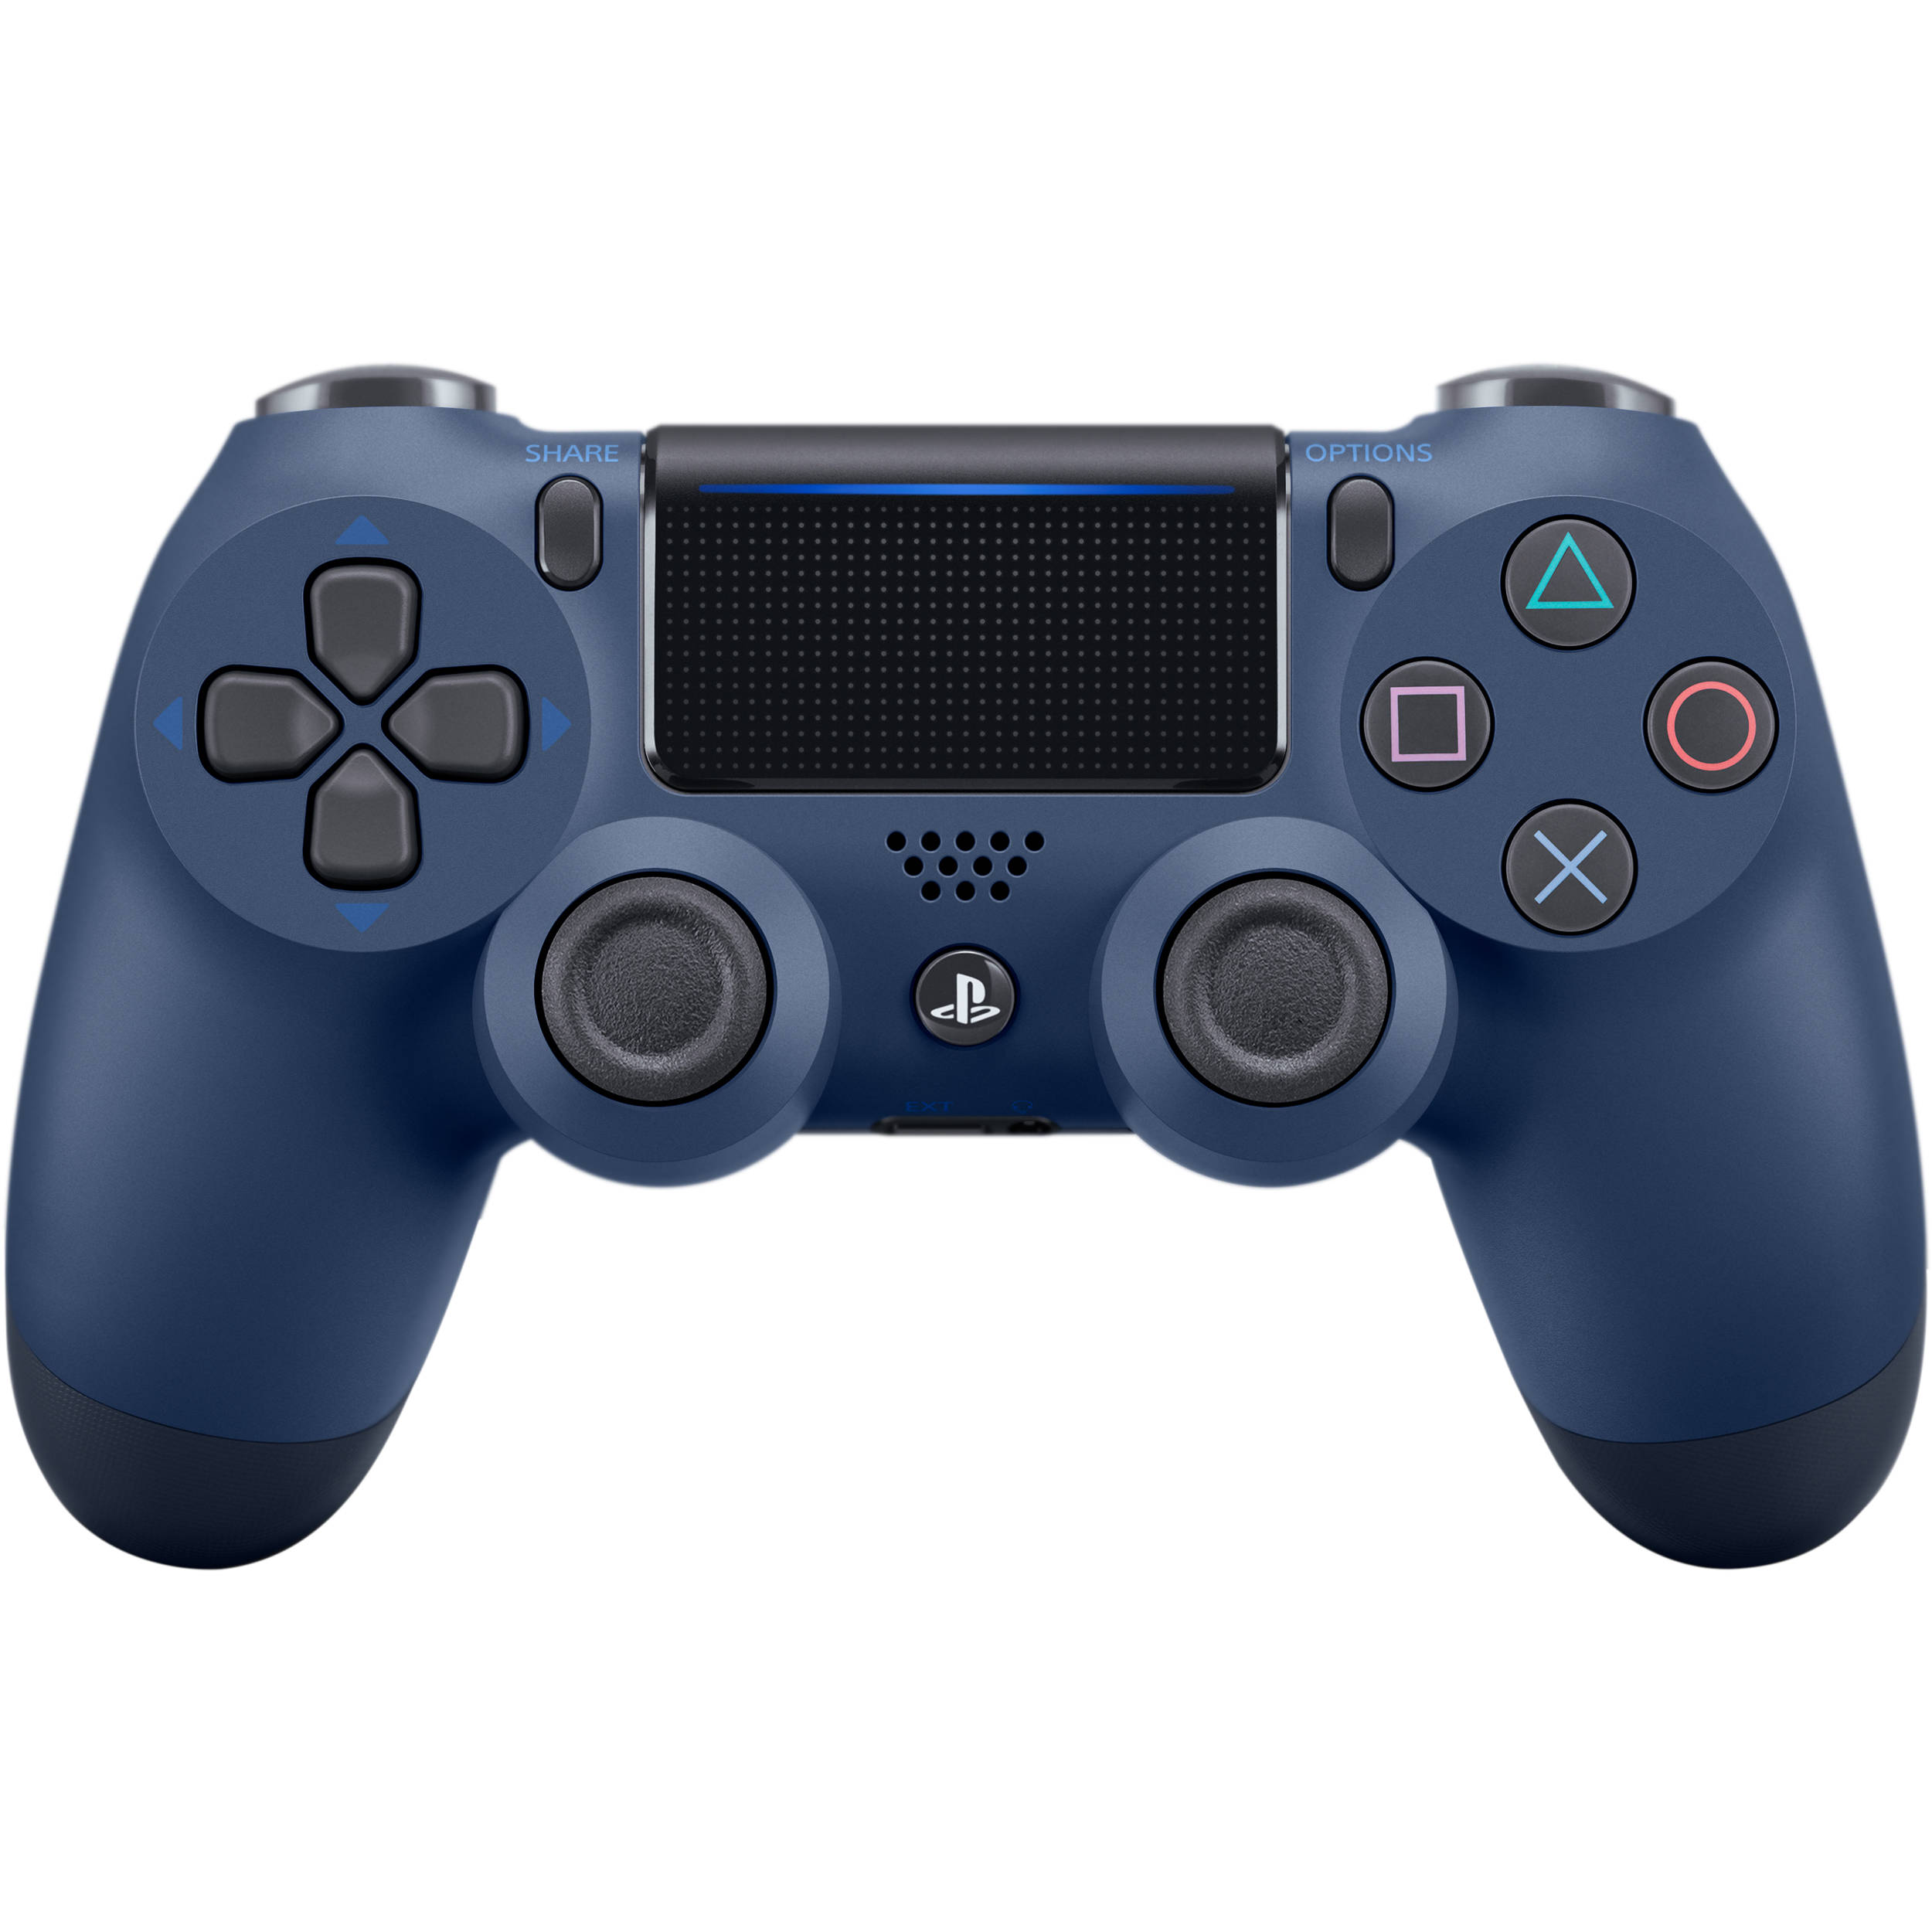 Sony PS4 DualShock 4 Wireless Controller - Midnight Blue - image 4 of 5